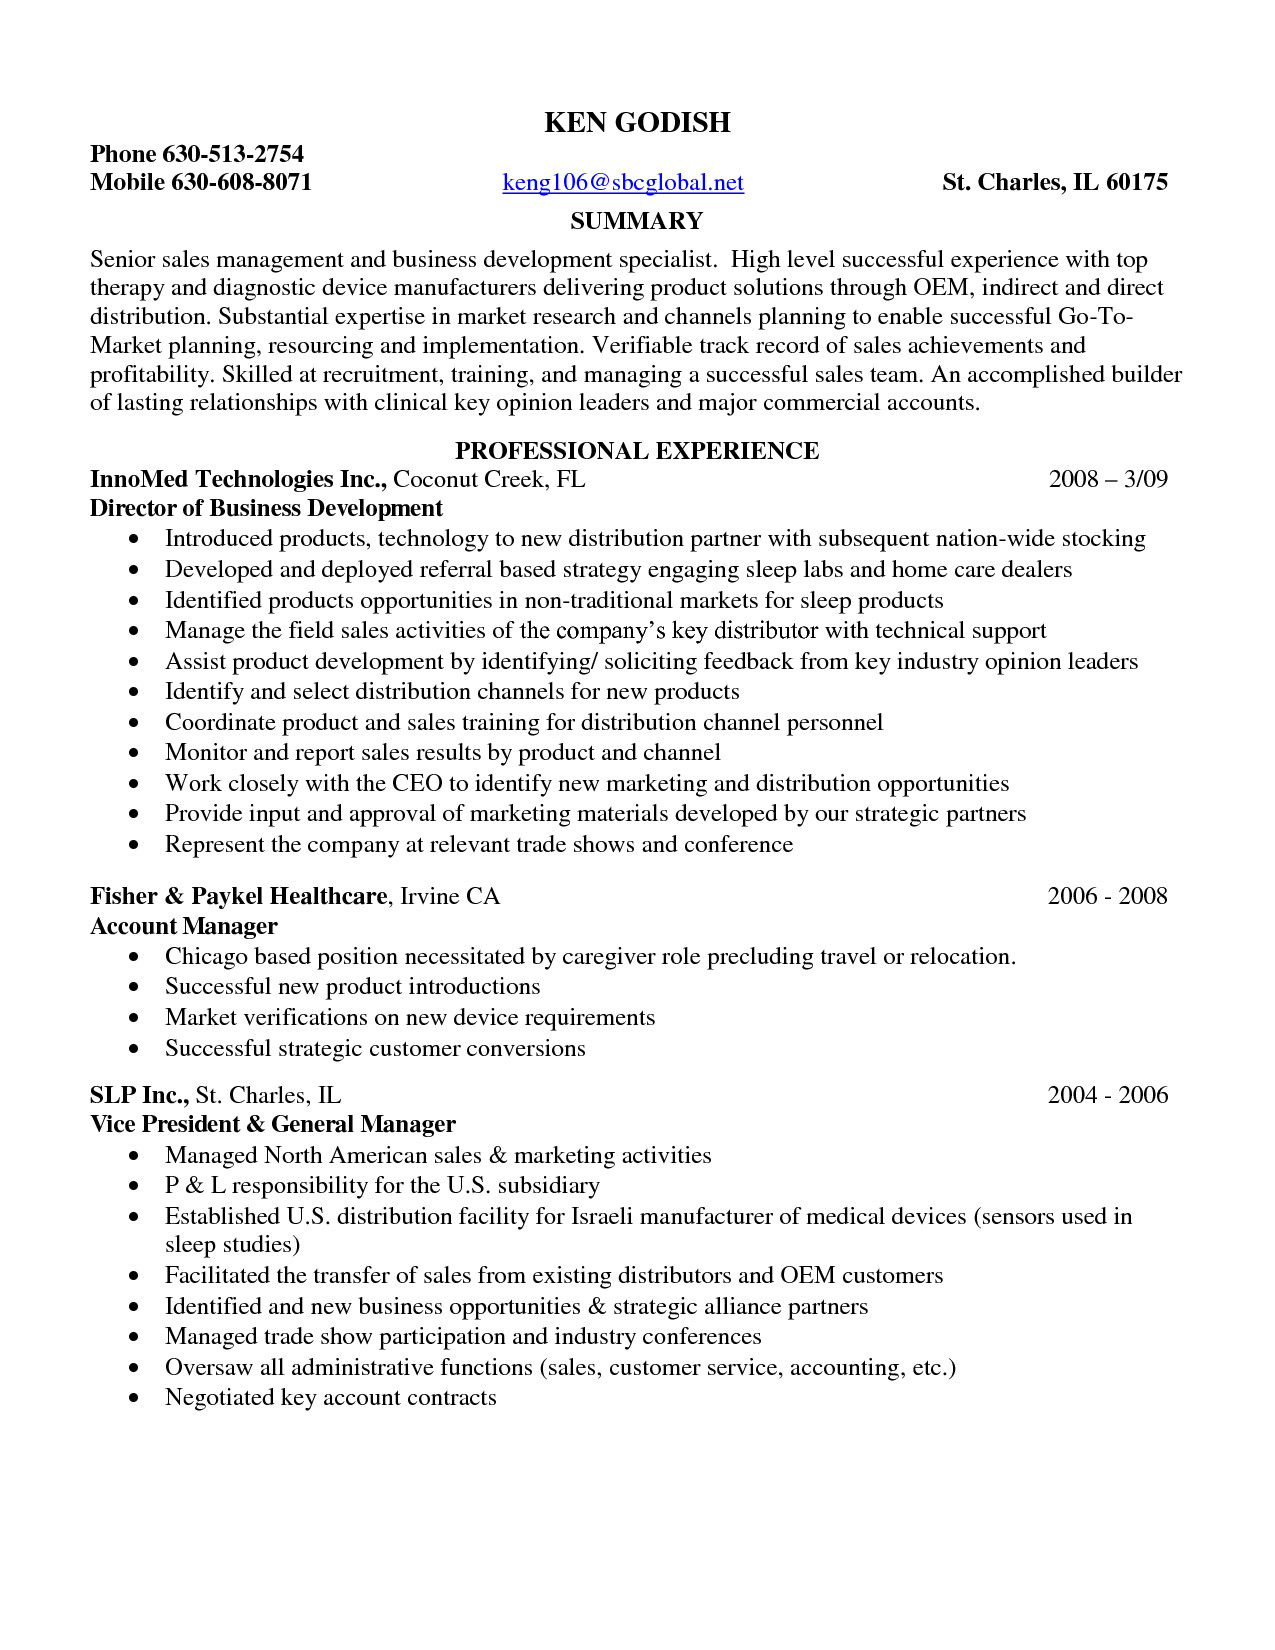 Entry Level Pharmaceutical Sales Rep Resume Sample Sample Resume Entry Level Pharmaceutical Sales